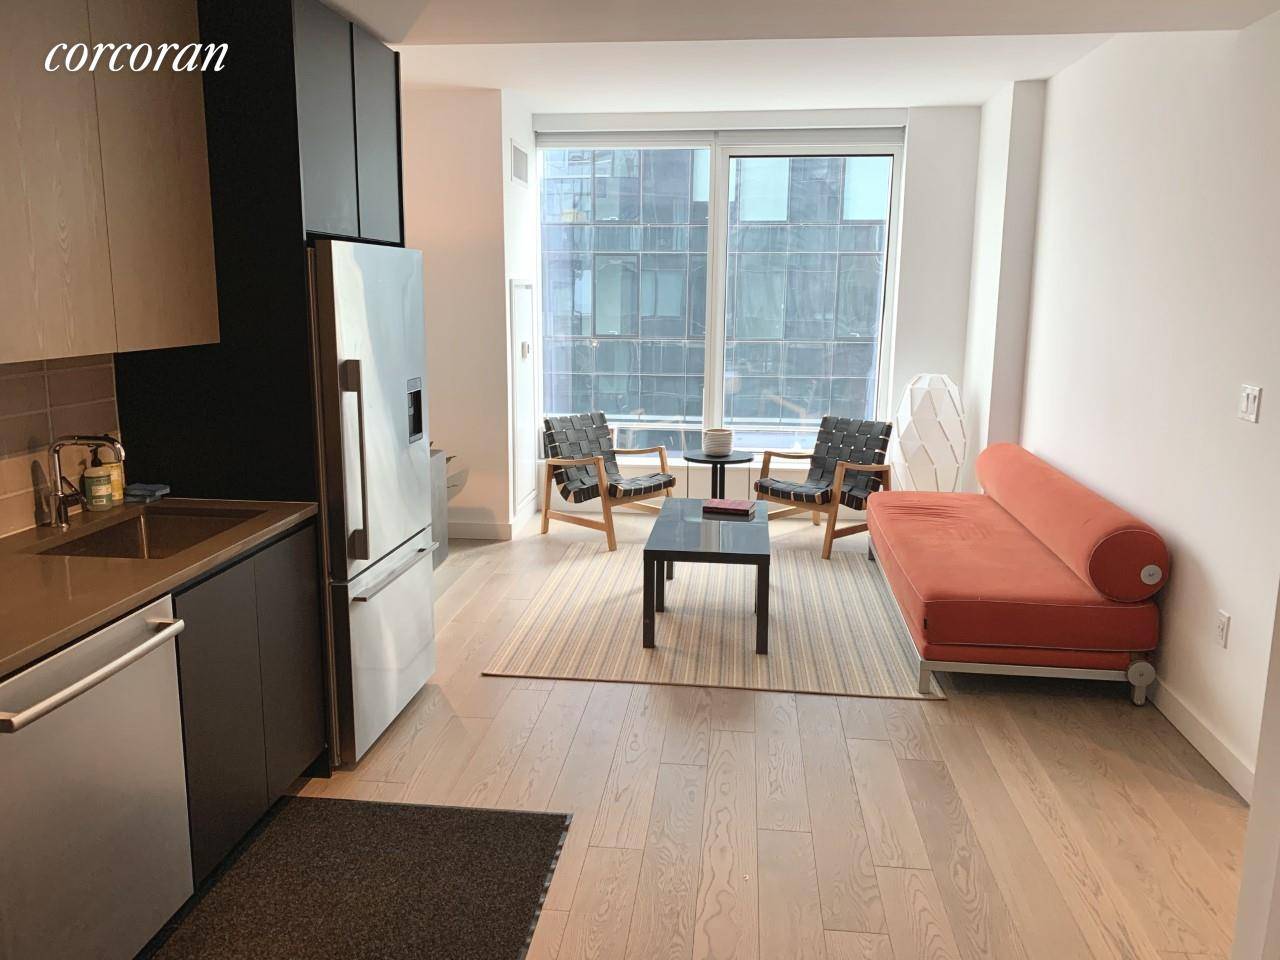 Lowest net price and lowest gross price for a 1 bed in this building.